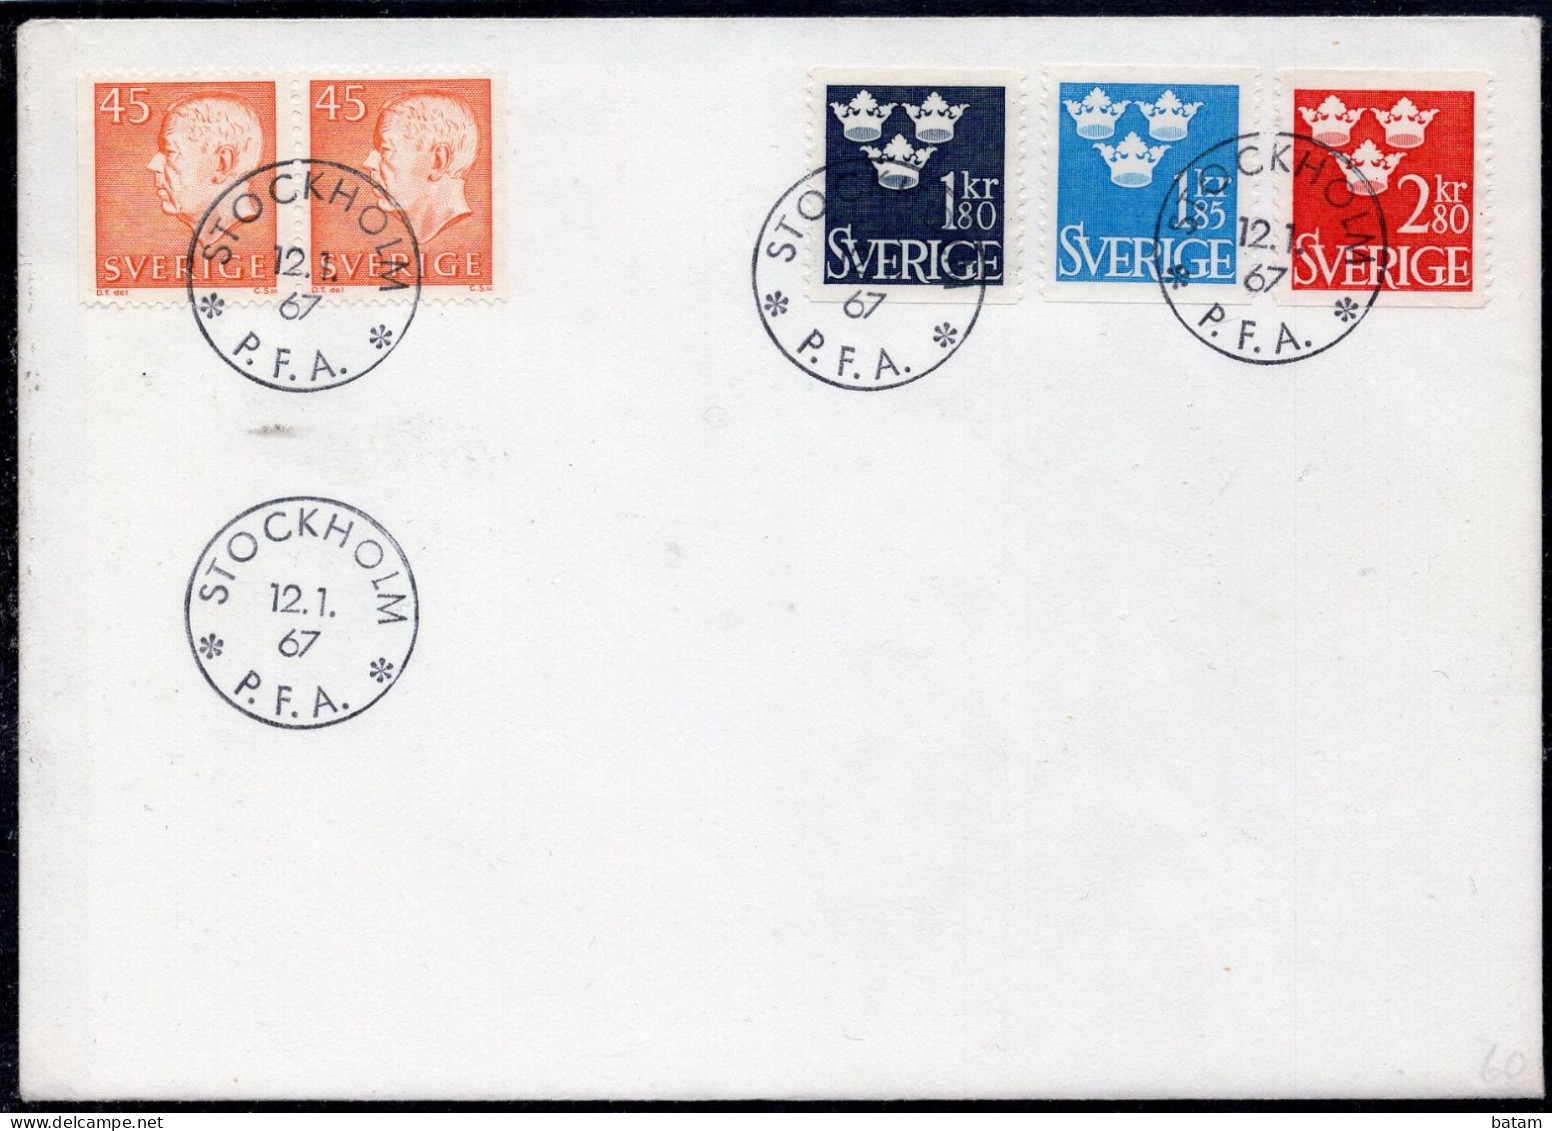 Sweden 1967 -  Tree Crowns - New Values- Cover - Covers & Documents